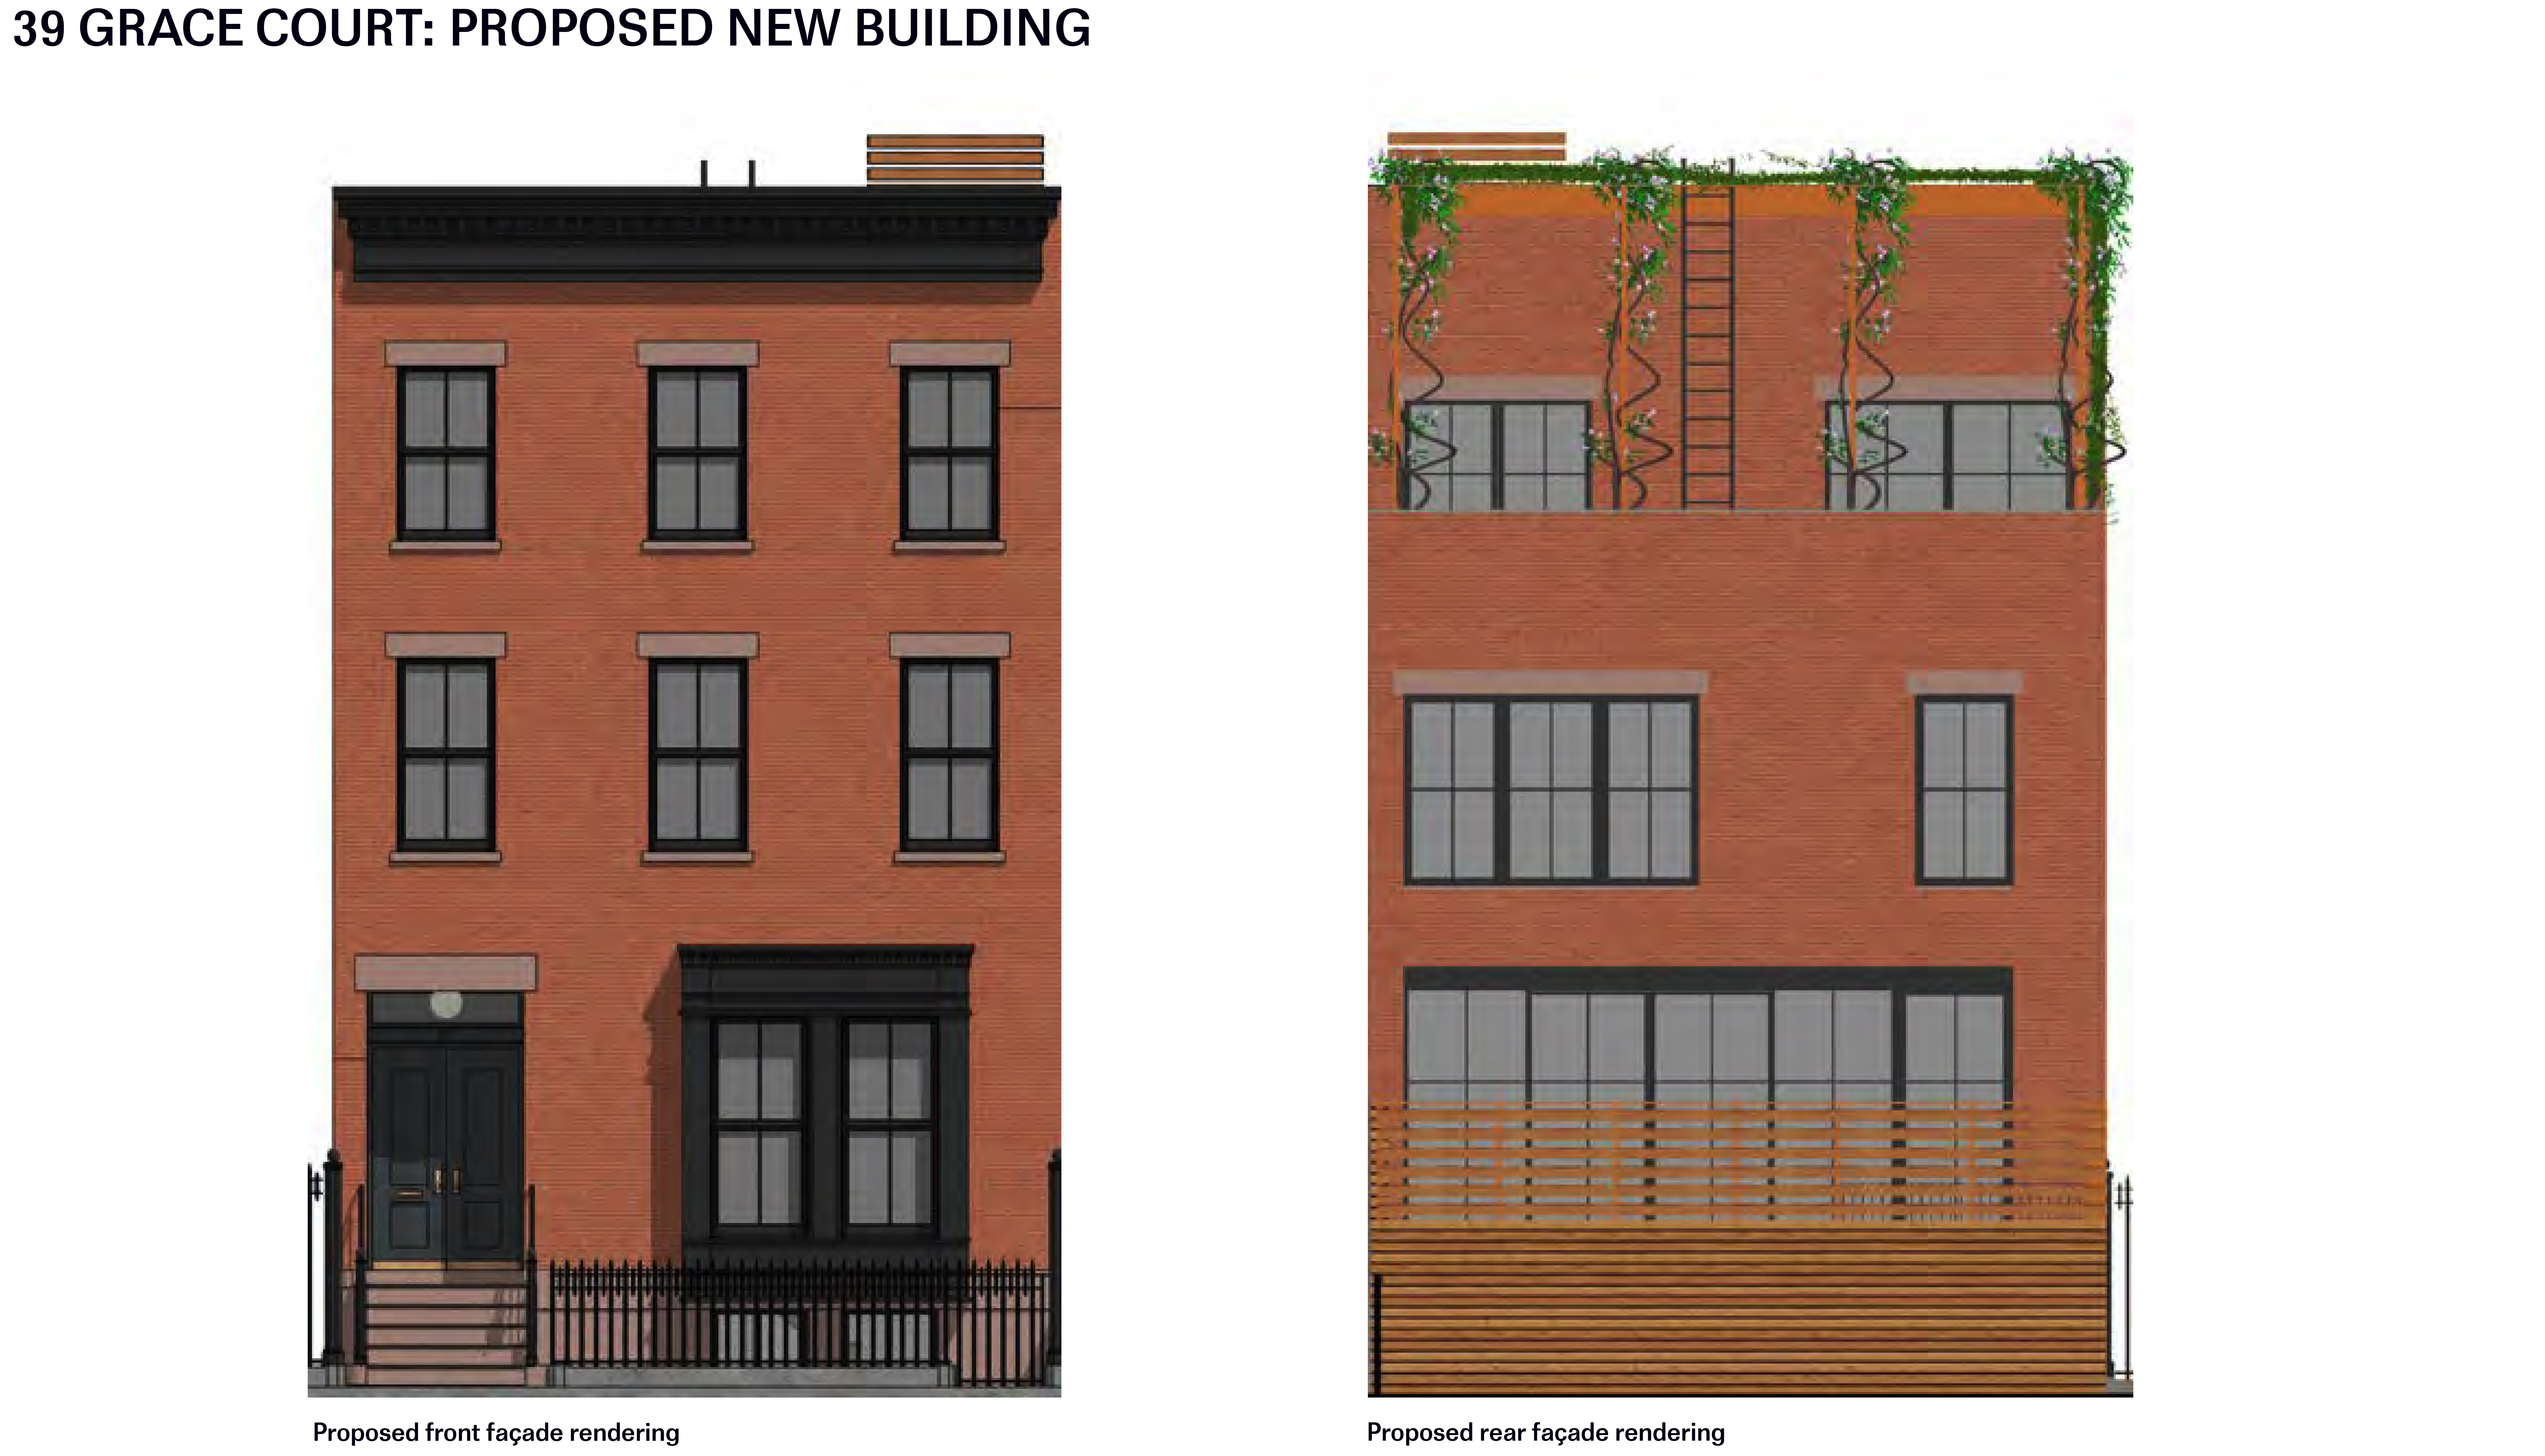 rendering showing front and rear facades of proposed house